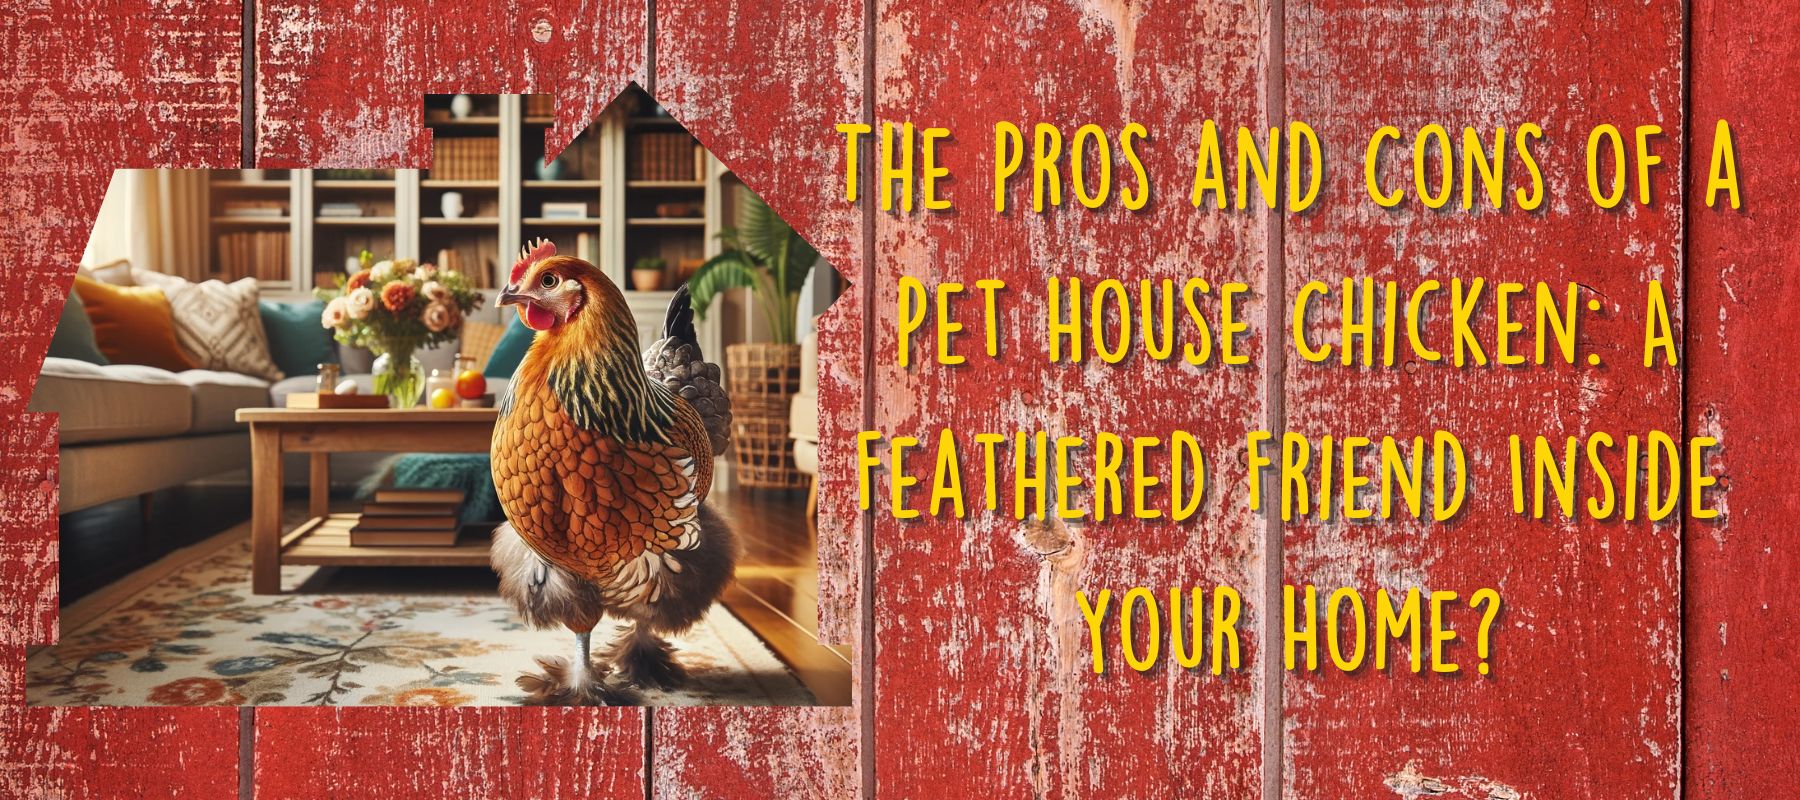 The Pros and Cons of a Pet House Chicken: A Feathered Friend Inside Your Home?